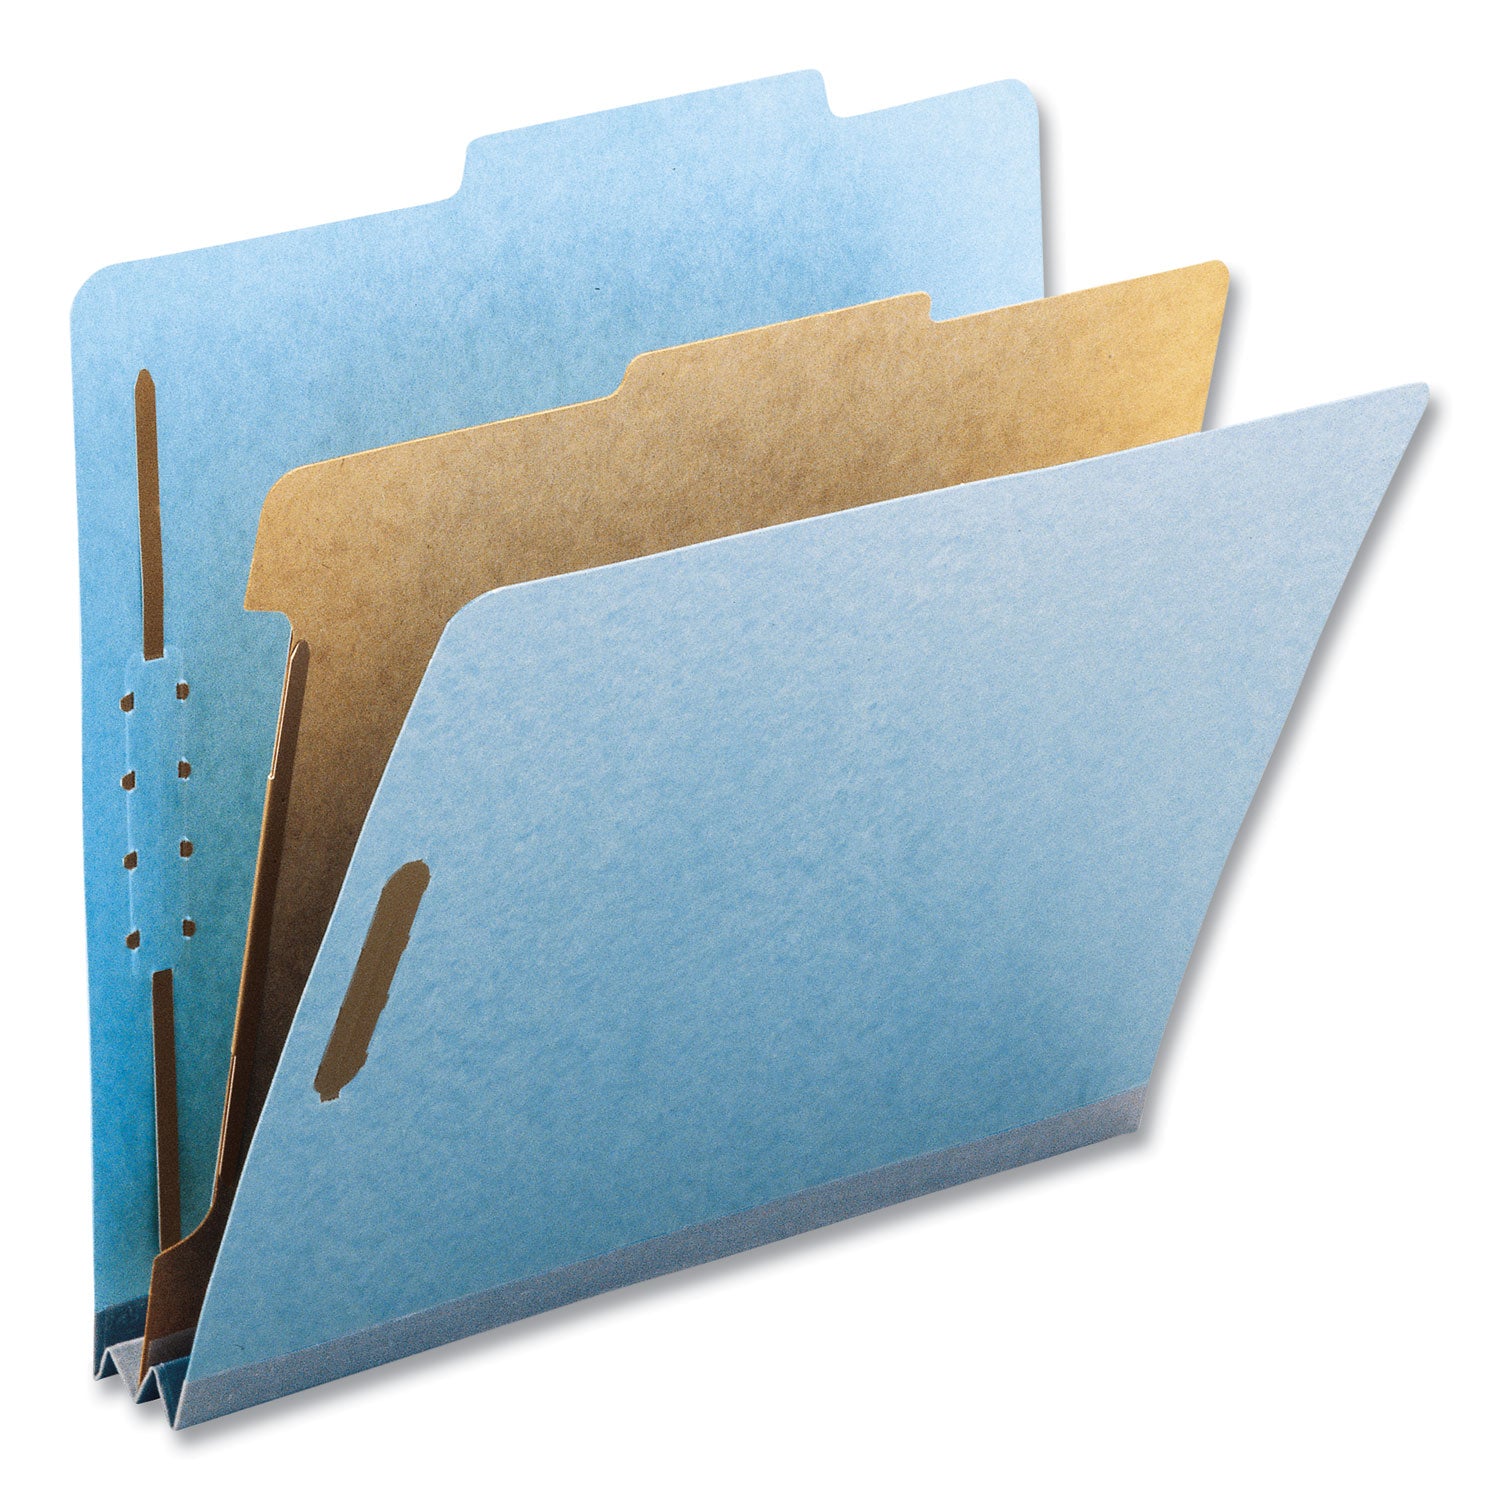 Recycled Pressboard Classification Folders, 2" Expansion, 1 Divider, 4 Fasteners, Letter Size, Blue Exterior, 10/Box - 